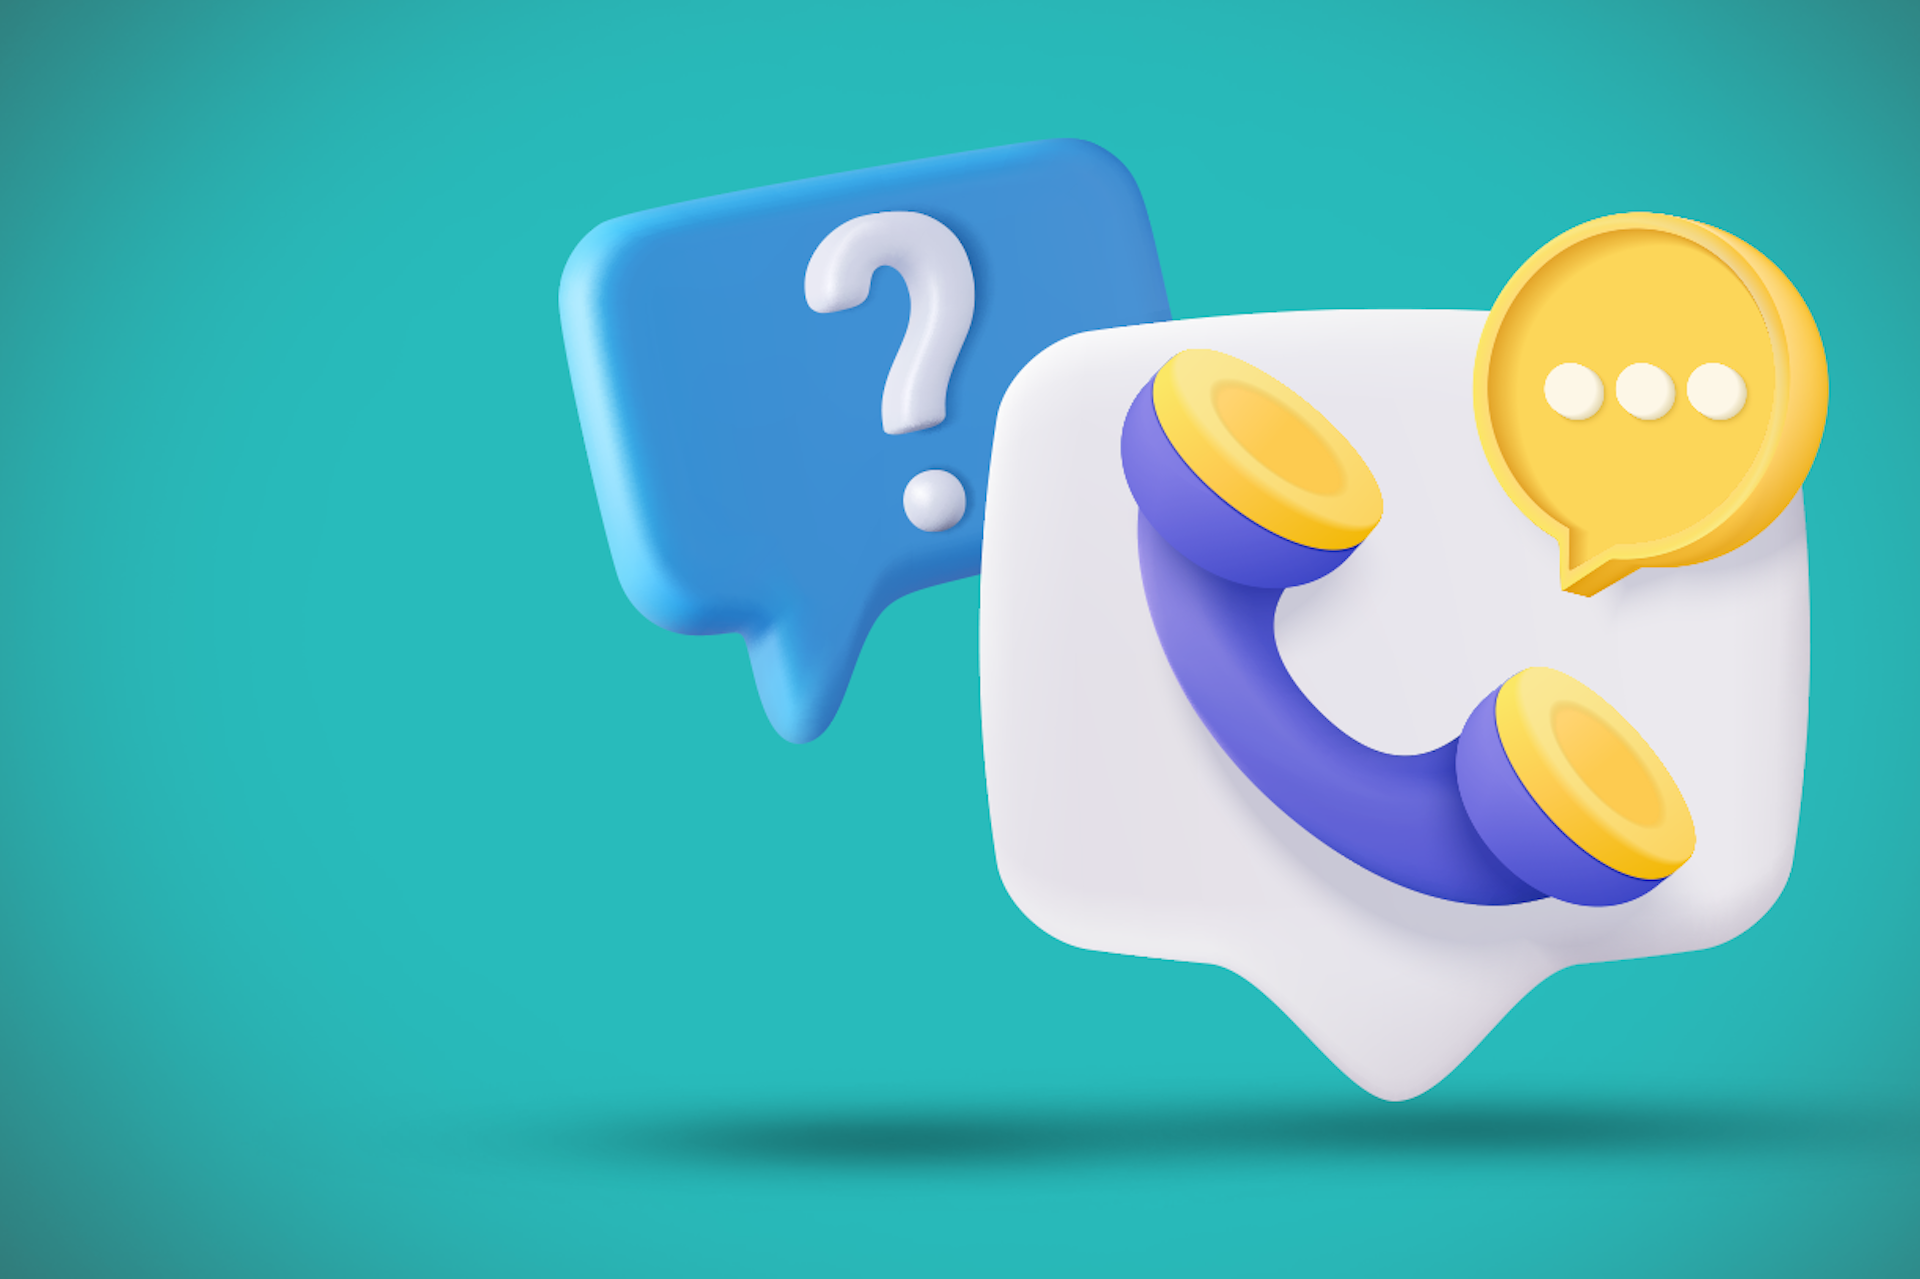 Chat bubbles containing a question mark and a telephone, representing a customer service discussion.